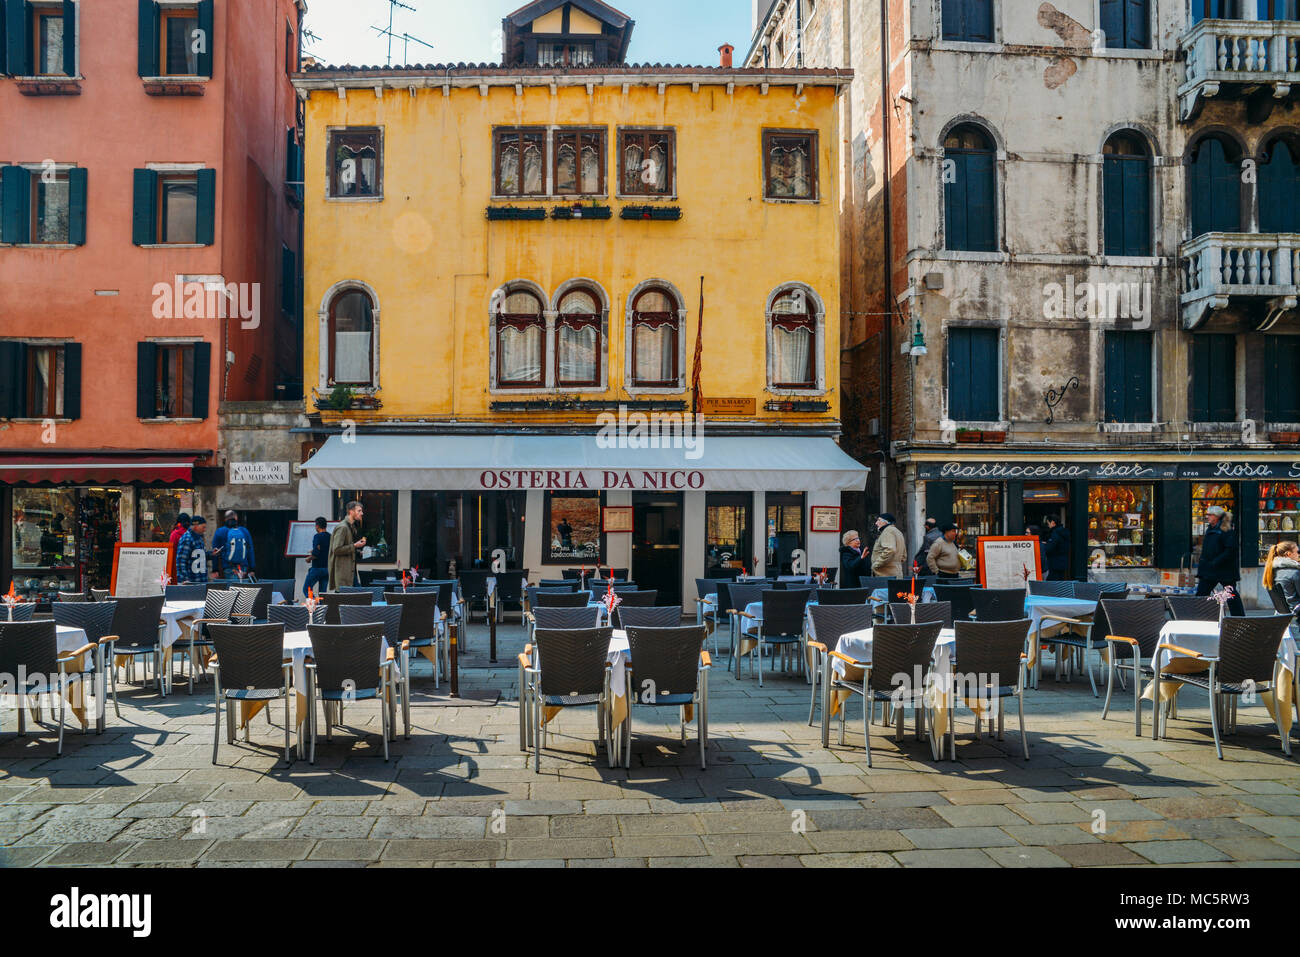 Venice, Italy - March 26th, 2018: Empty restaurant tables on the sidewalk in Venice Stock Photo